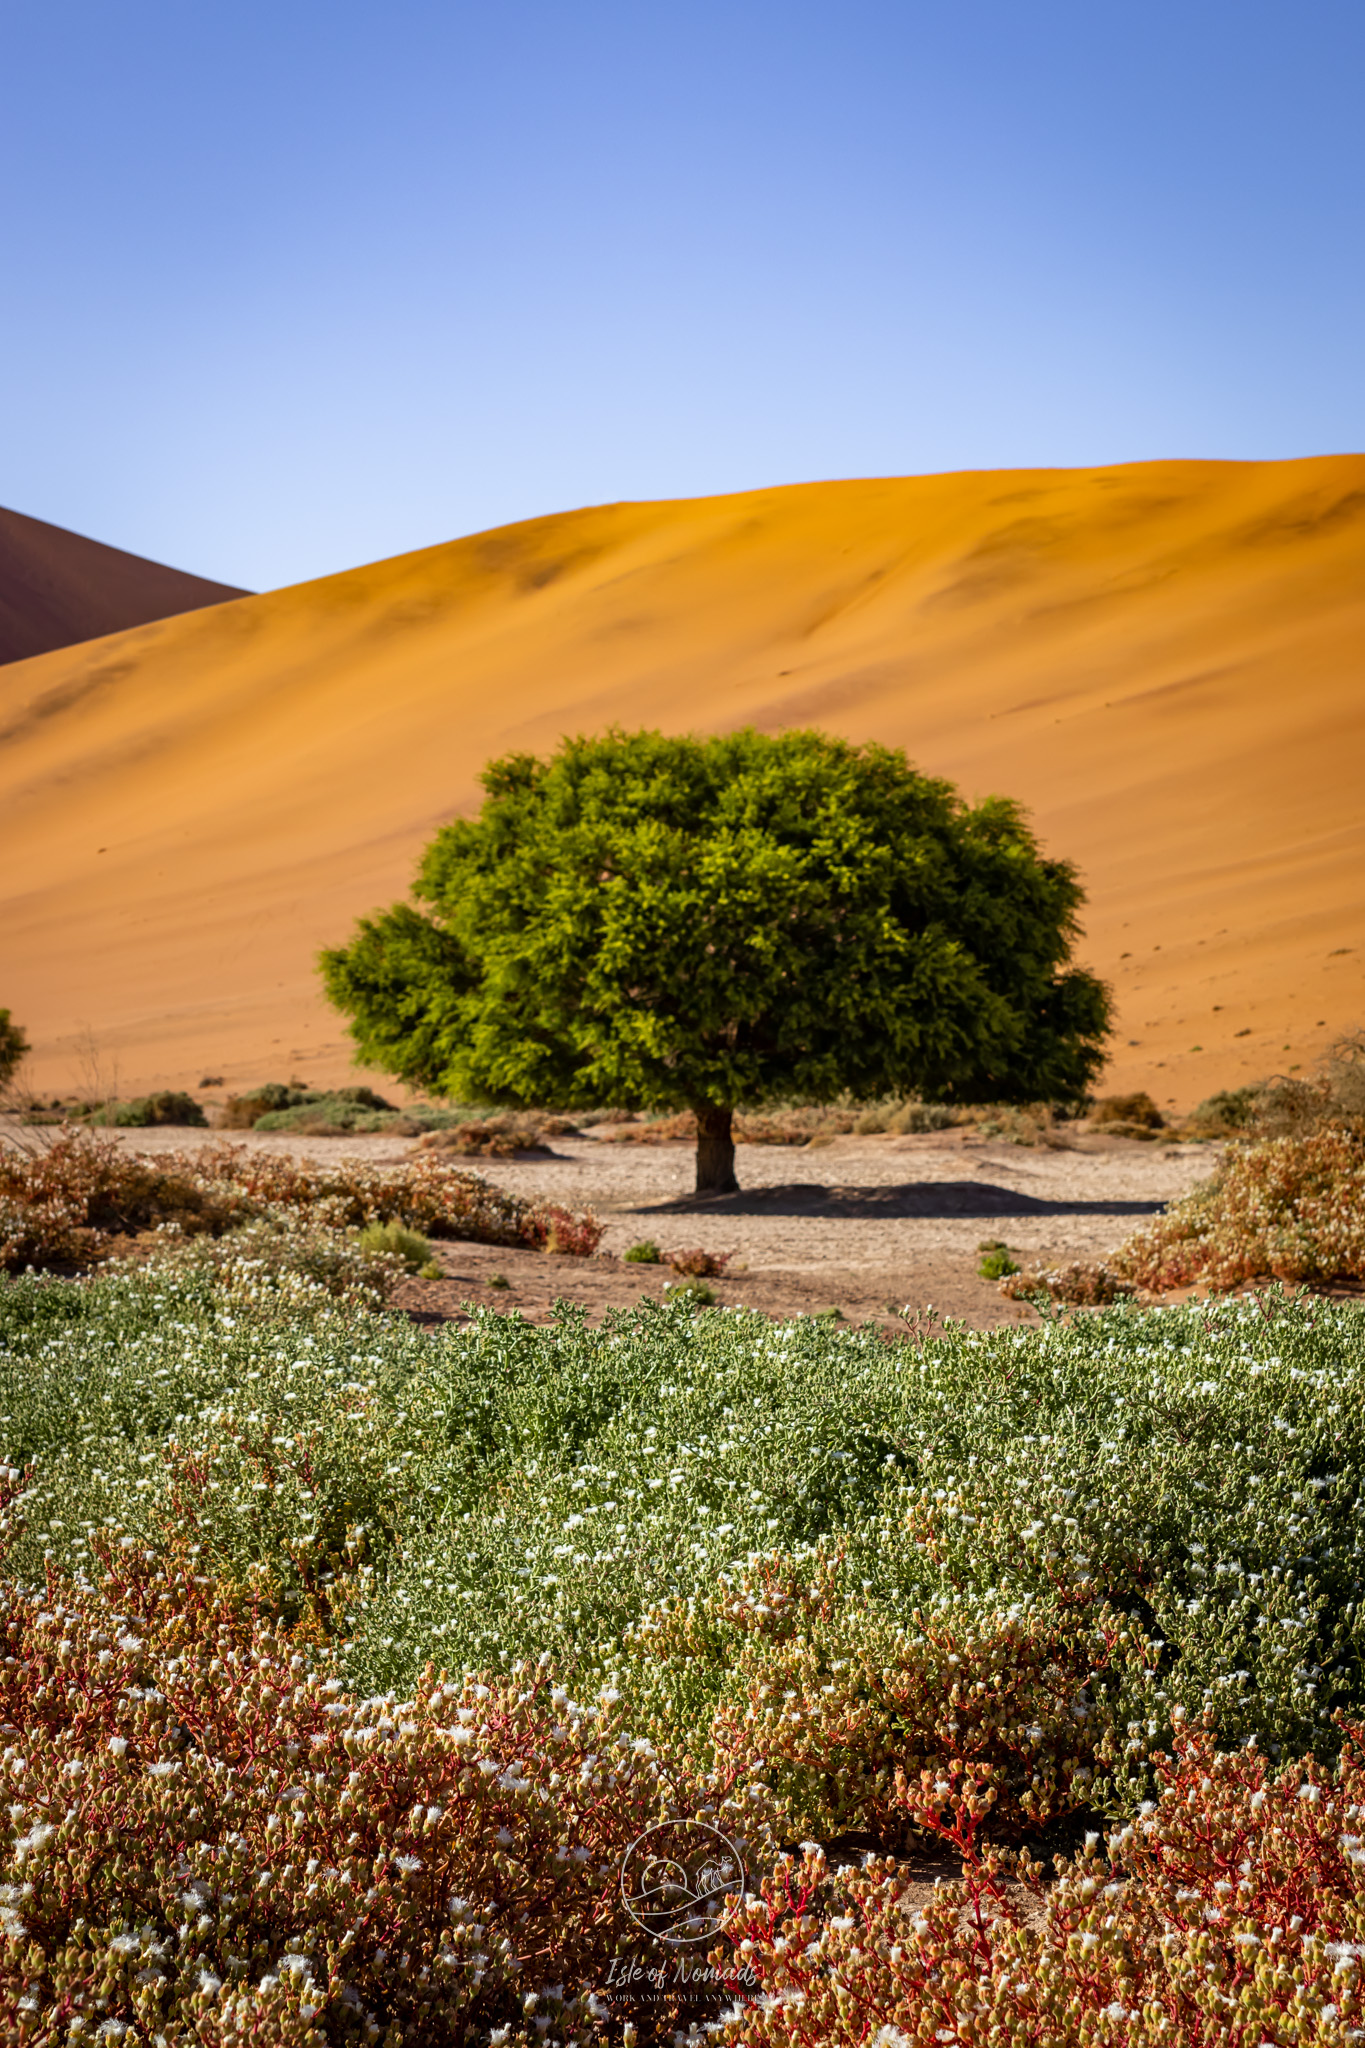 The different colors of Sossusvlei are beautiful!